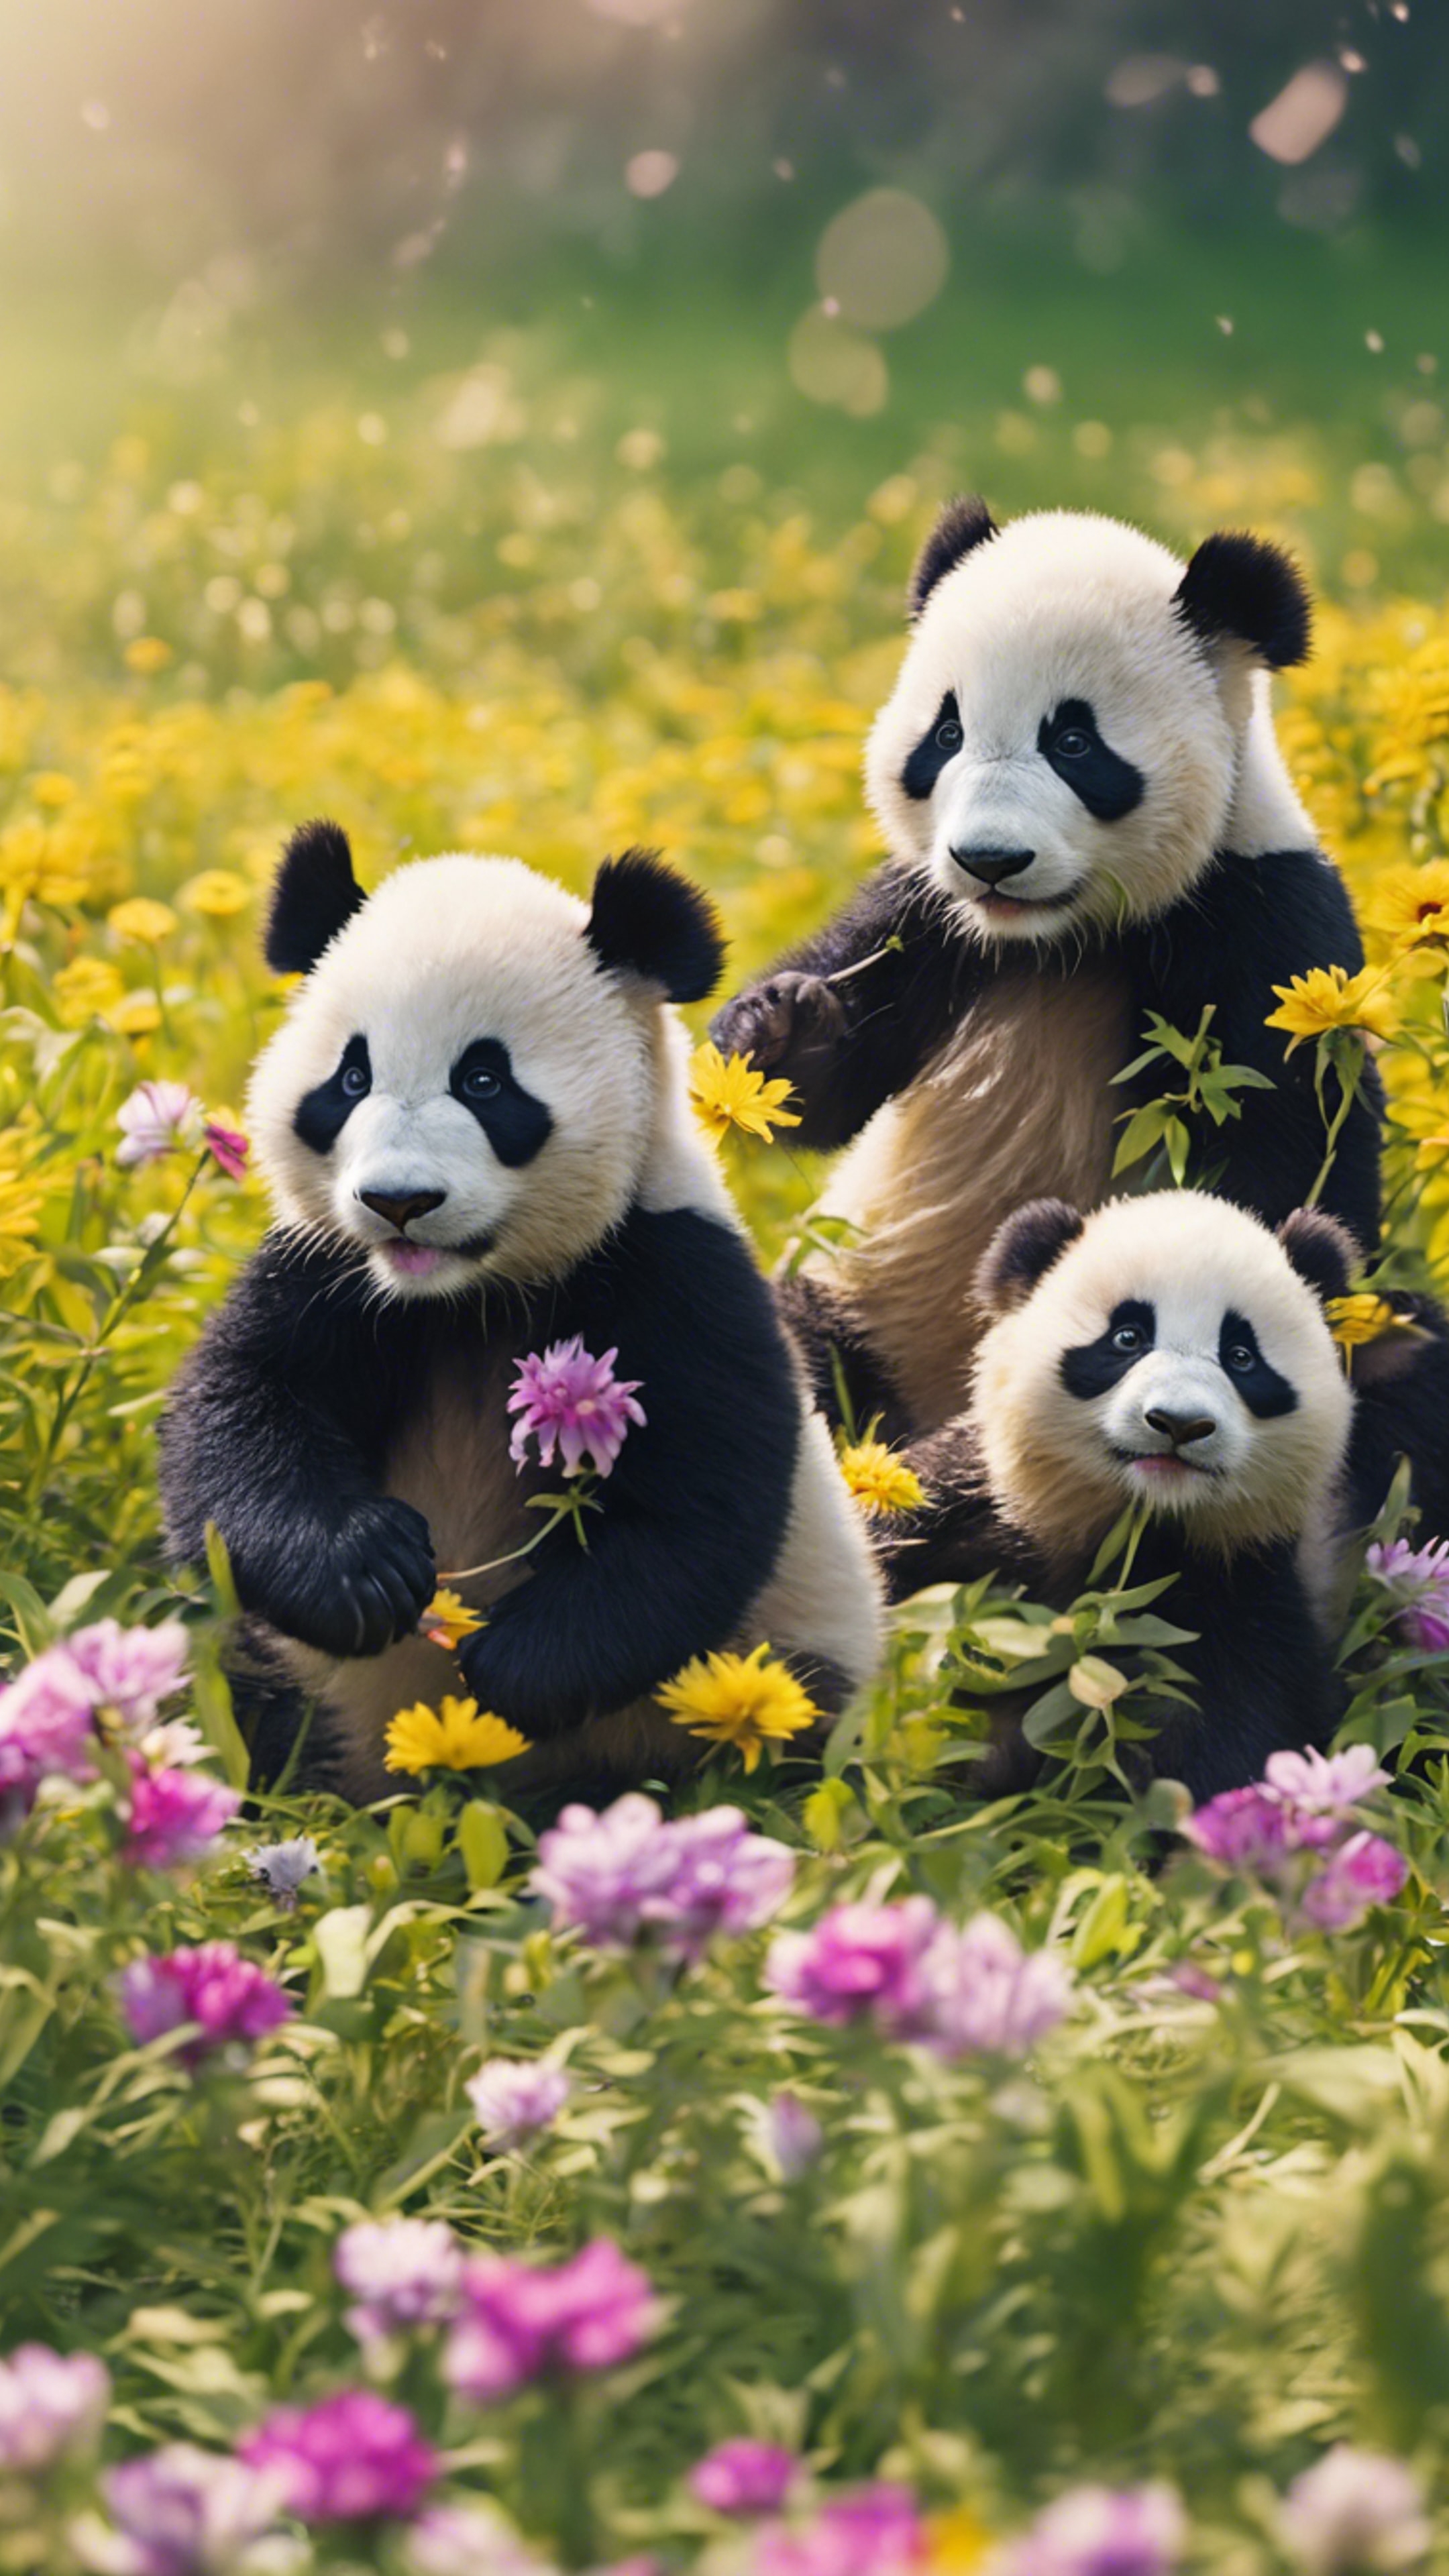 A group of lively panda cubs merrily playing tag in a field full of bright spring flowers. Kertas dinding[9de4fa100eef4aefa43d]